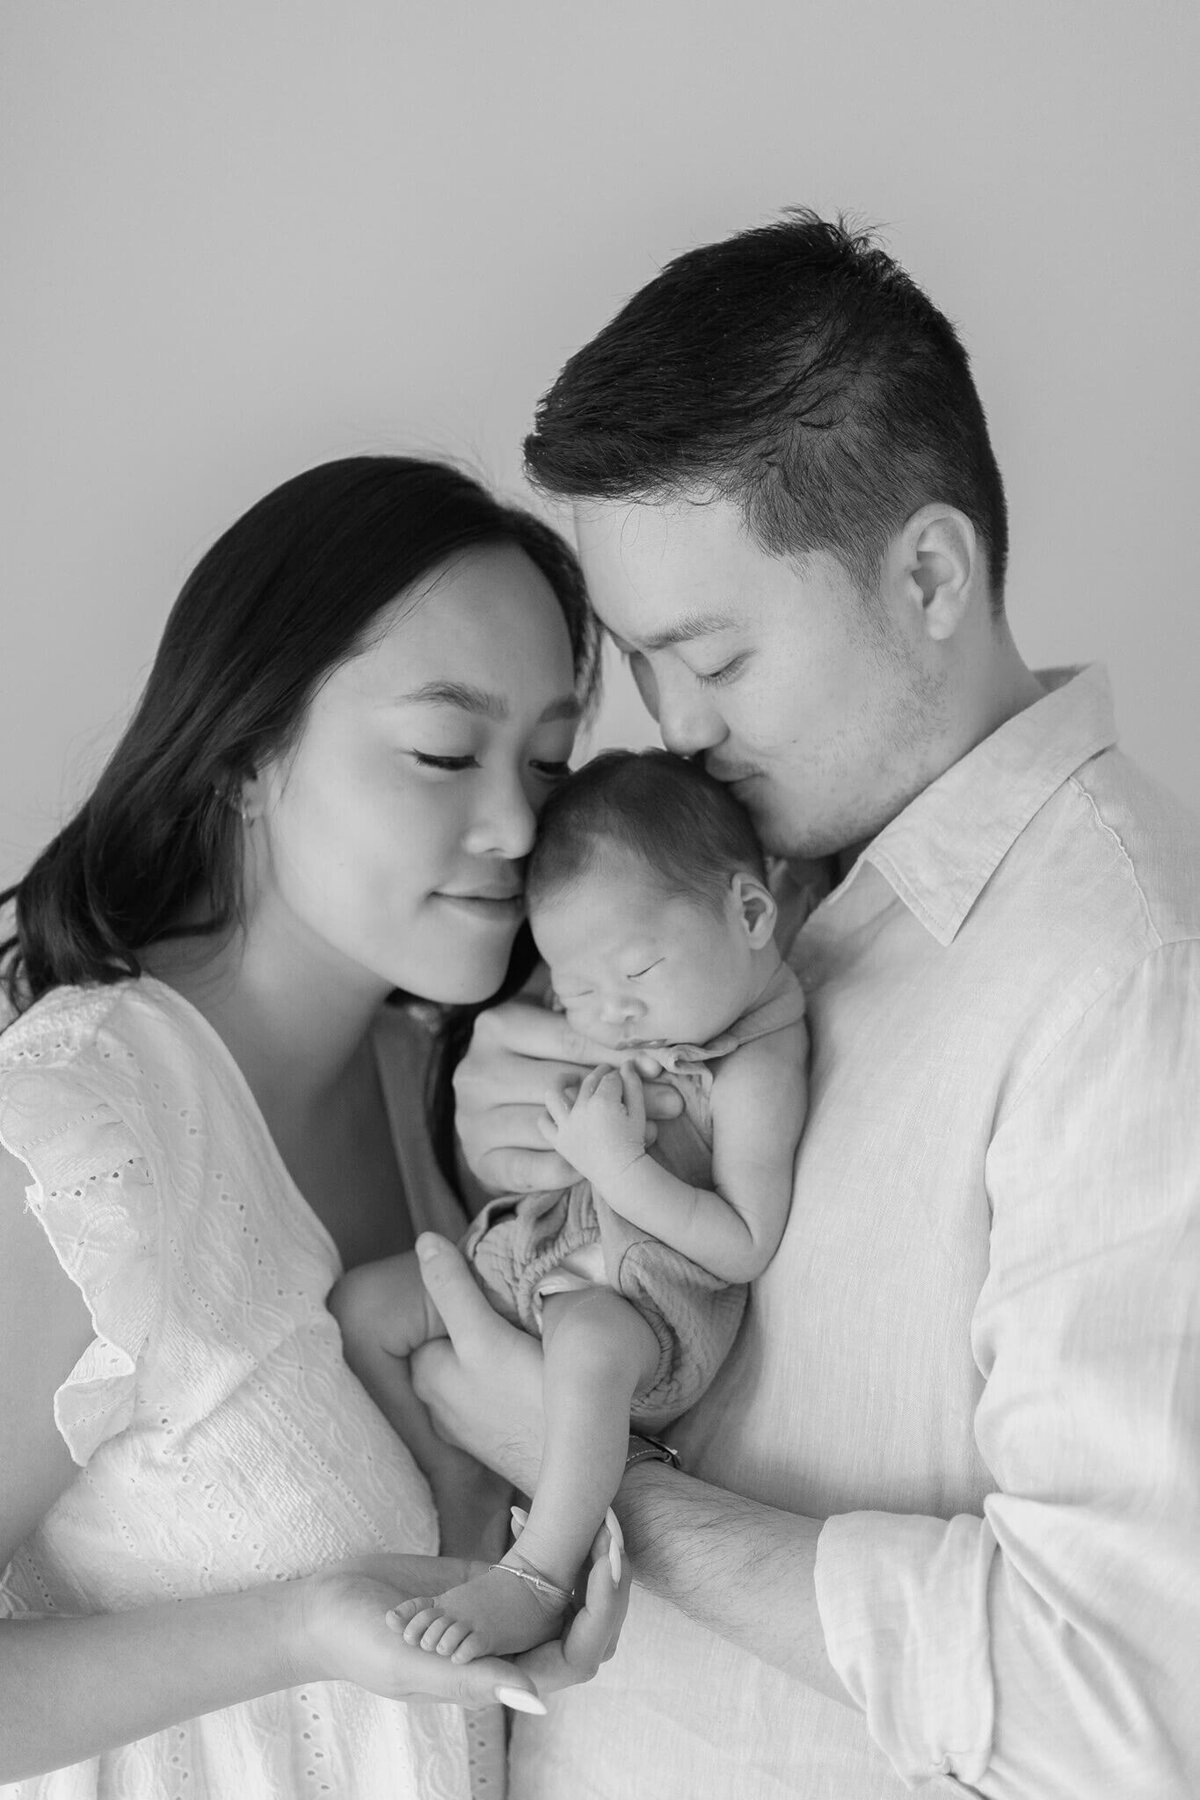 Witness the love of a Chinese couple holding their precious newborn, cherishing each moment in their Gold Coast home.